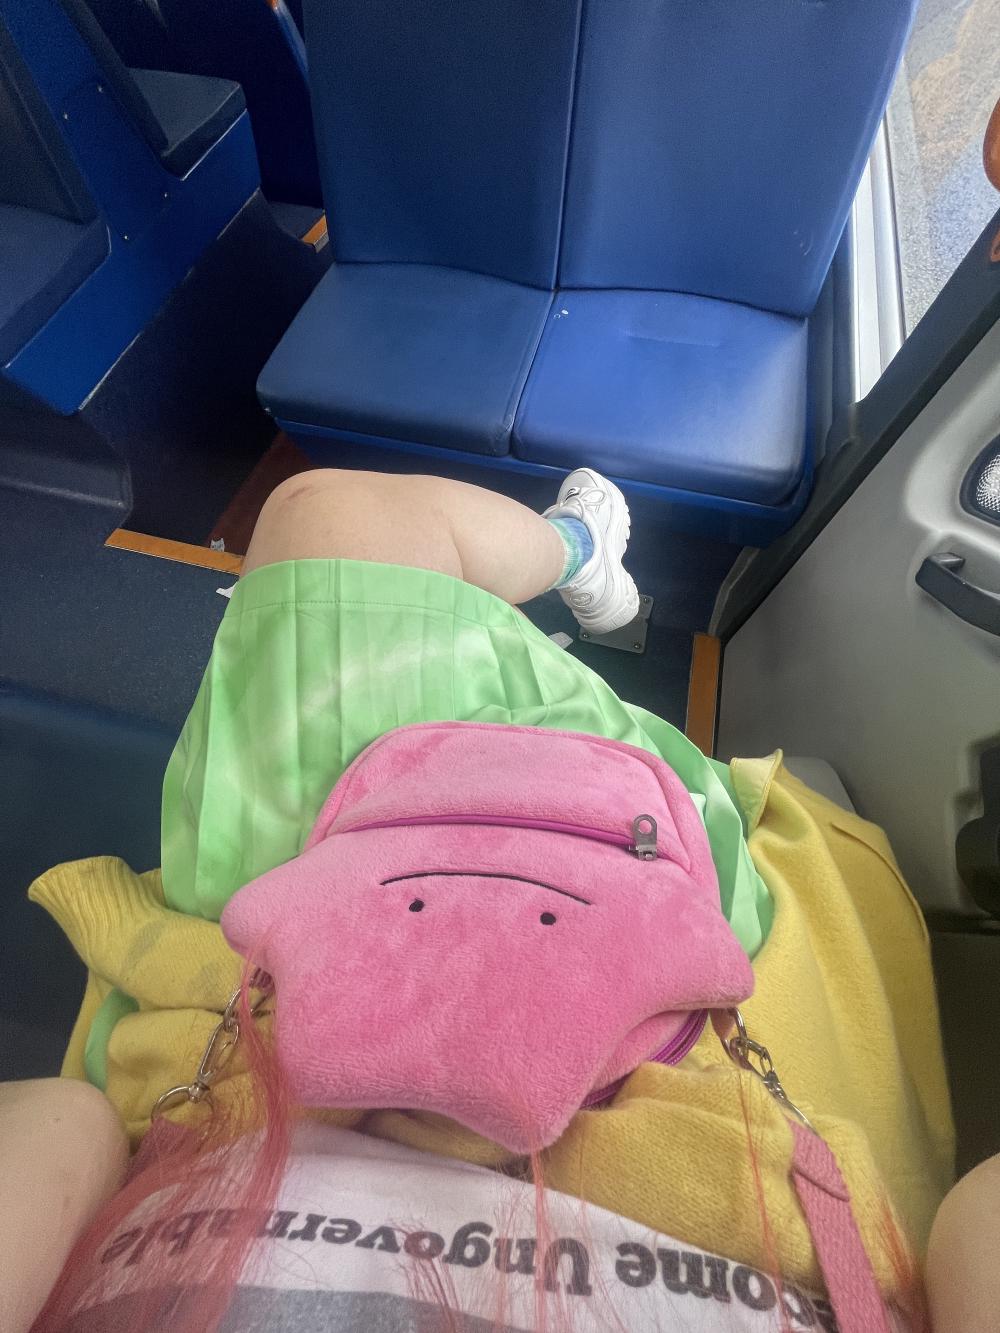 gab at the back of the bus wearing a neon green pleated skirt and a pink bag shaped like the pokemon ditto